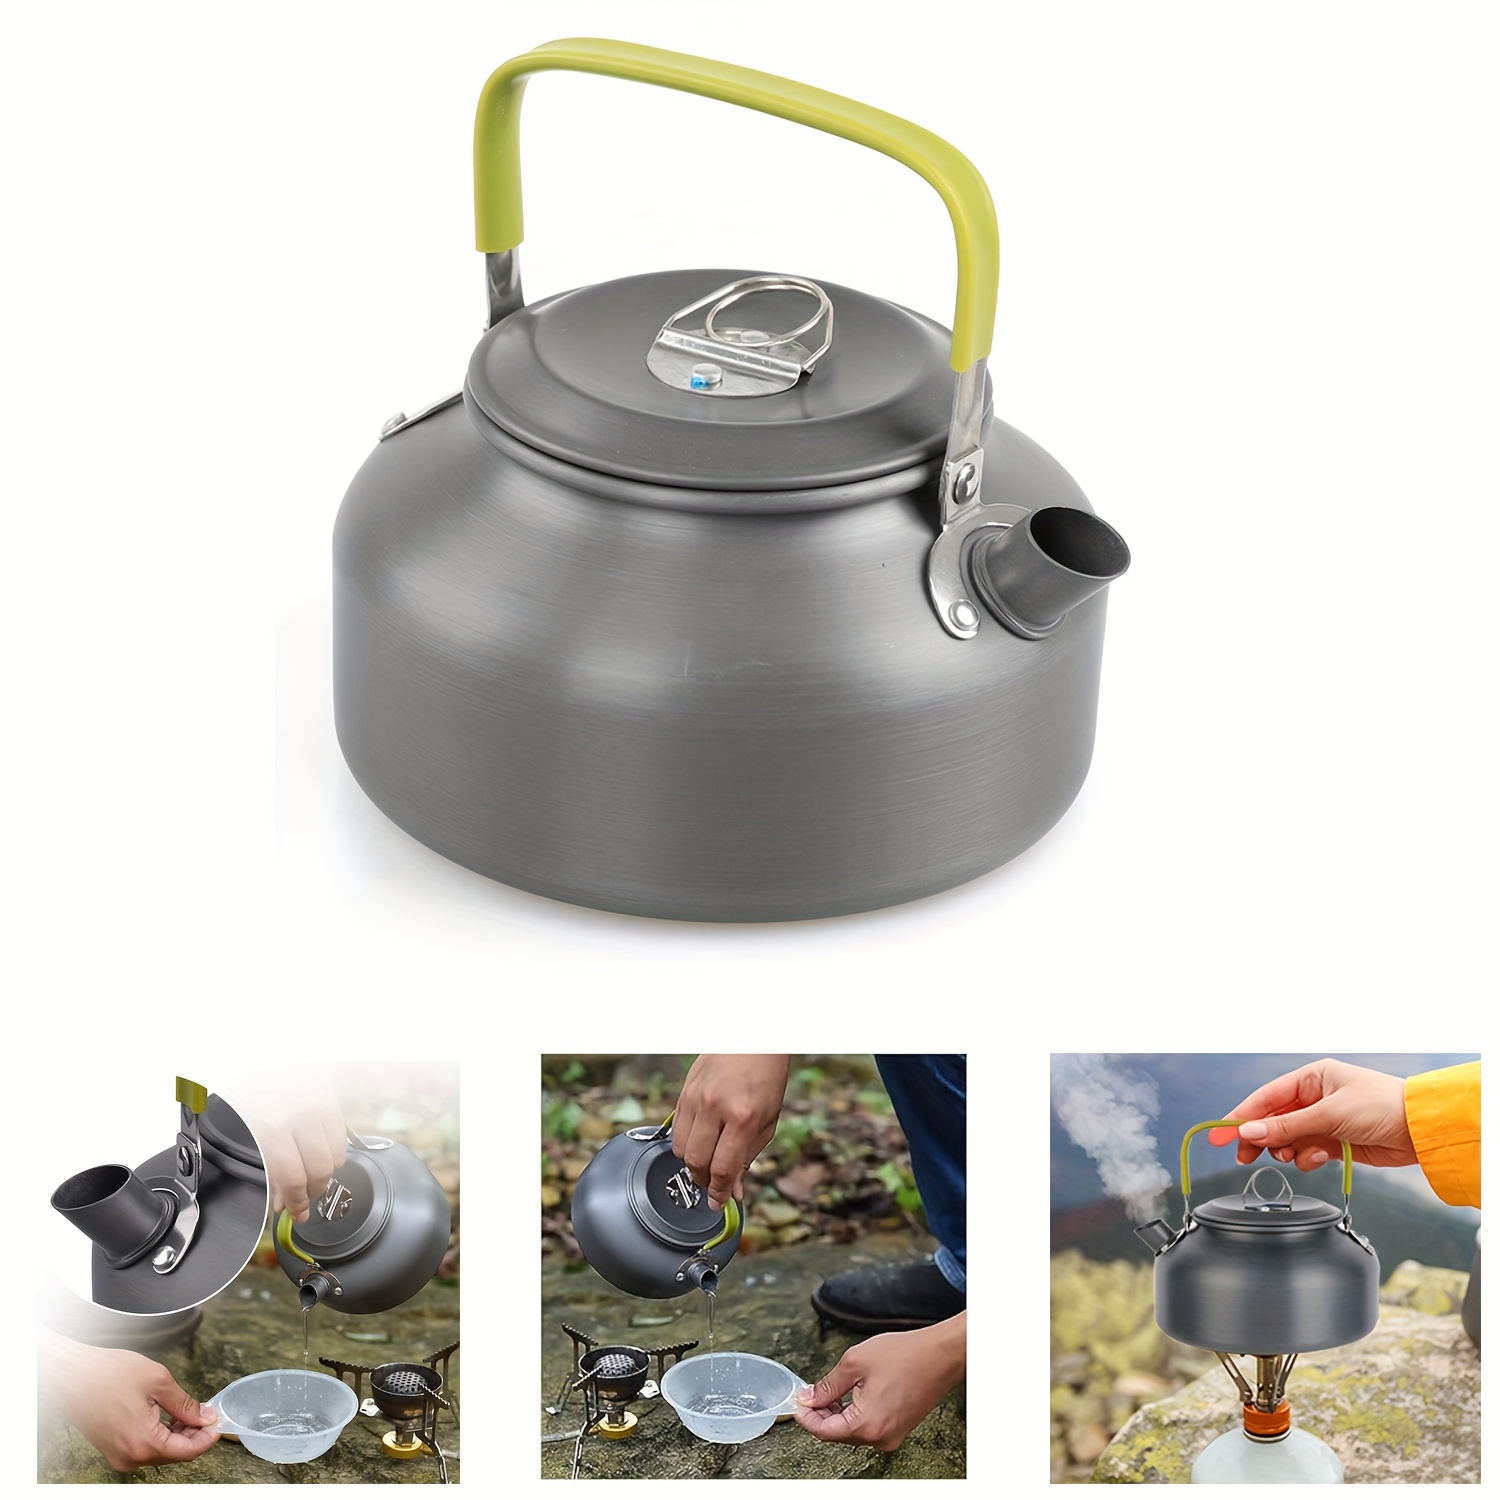 Bulin Camping Kettle 1.6L Aluminum Alloy Open Campfire Coffee Tea Pot Fast  Heating Outdoor Gear Great for Boiling Water Ultralight Portable for Hiking  Picnic Travel